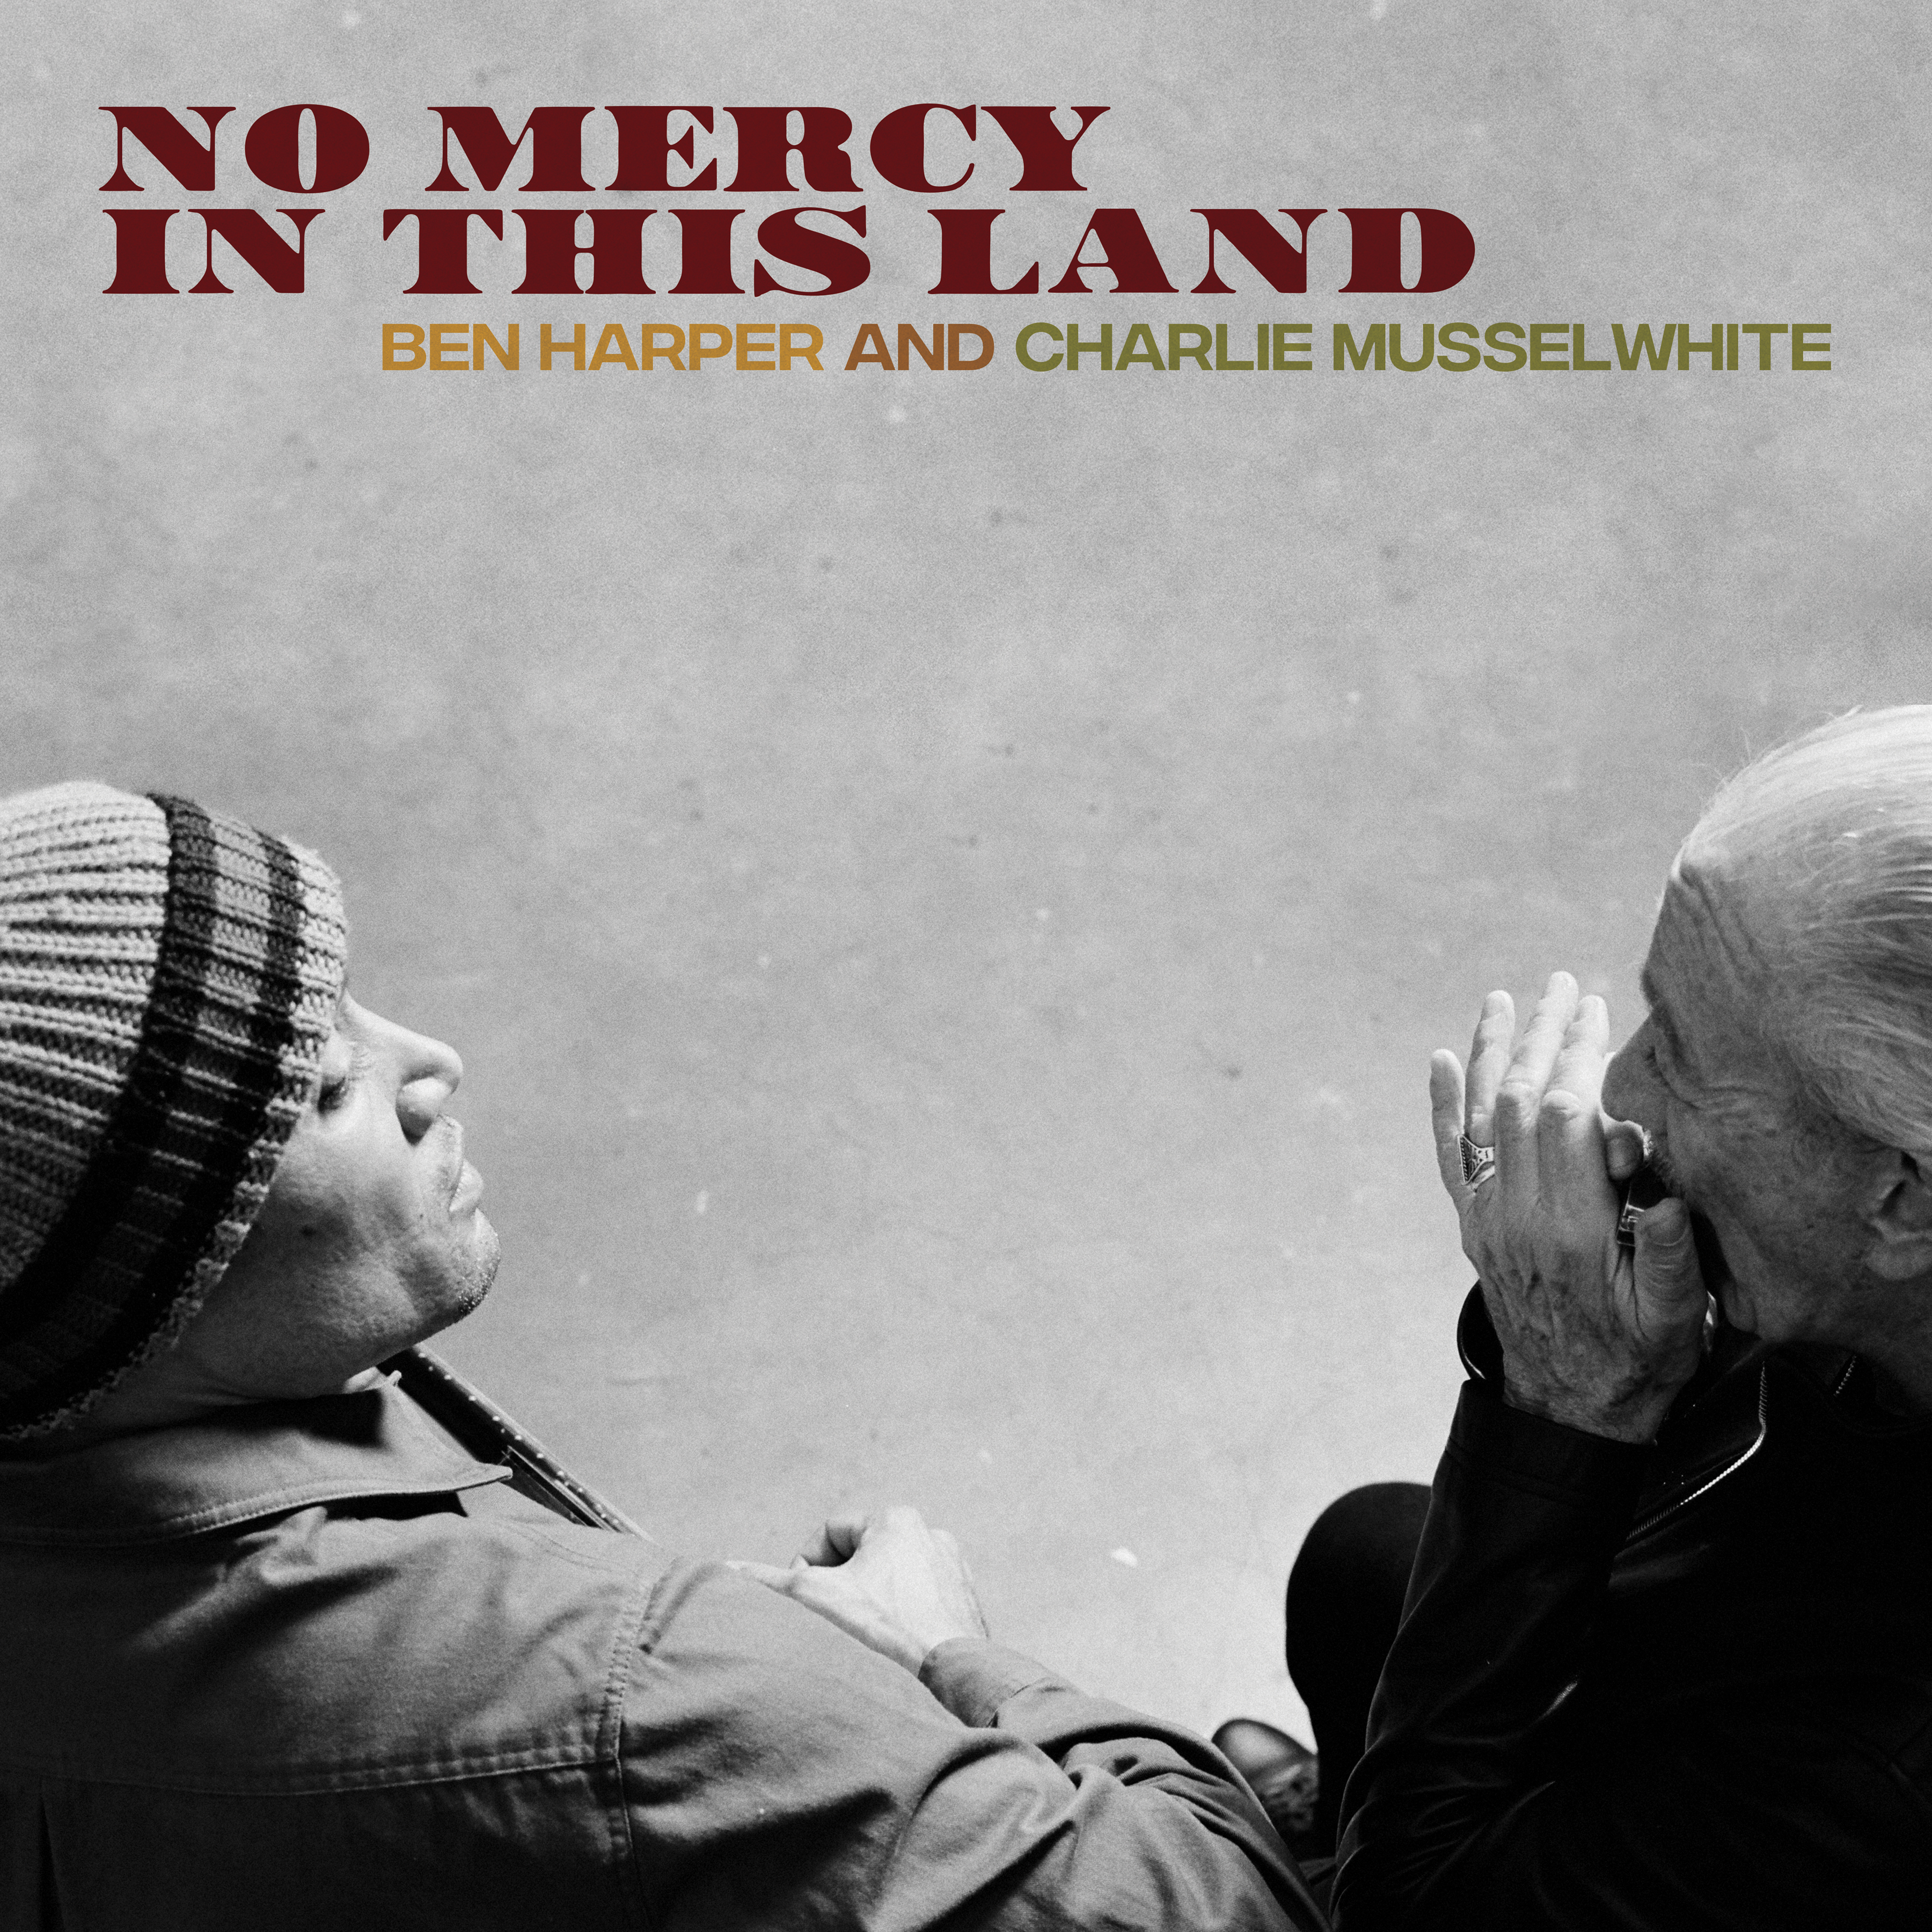 Ben Harper and Charlie Musselwhite - No Mercy In This Land (Blue vinyl)